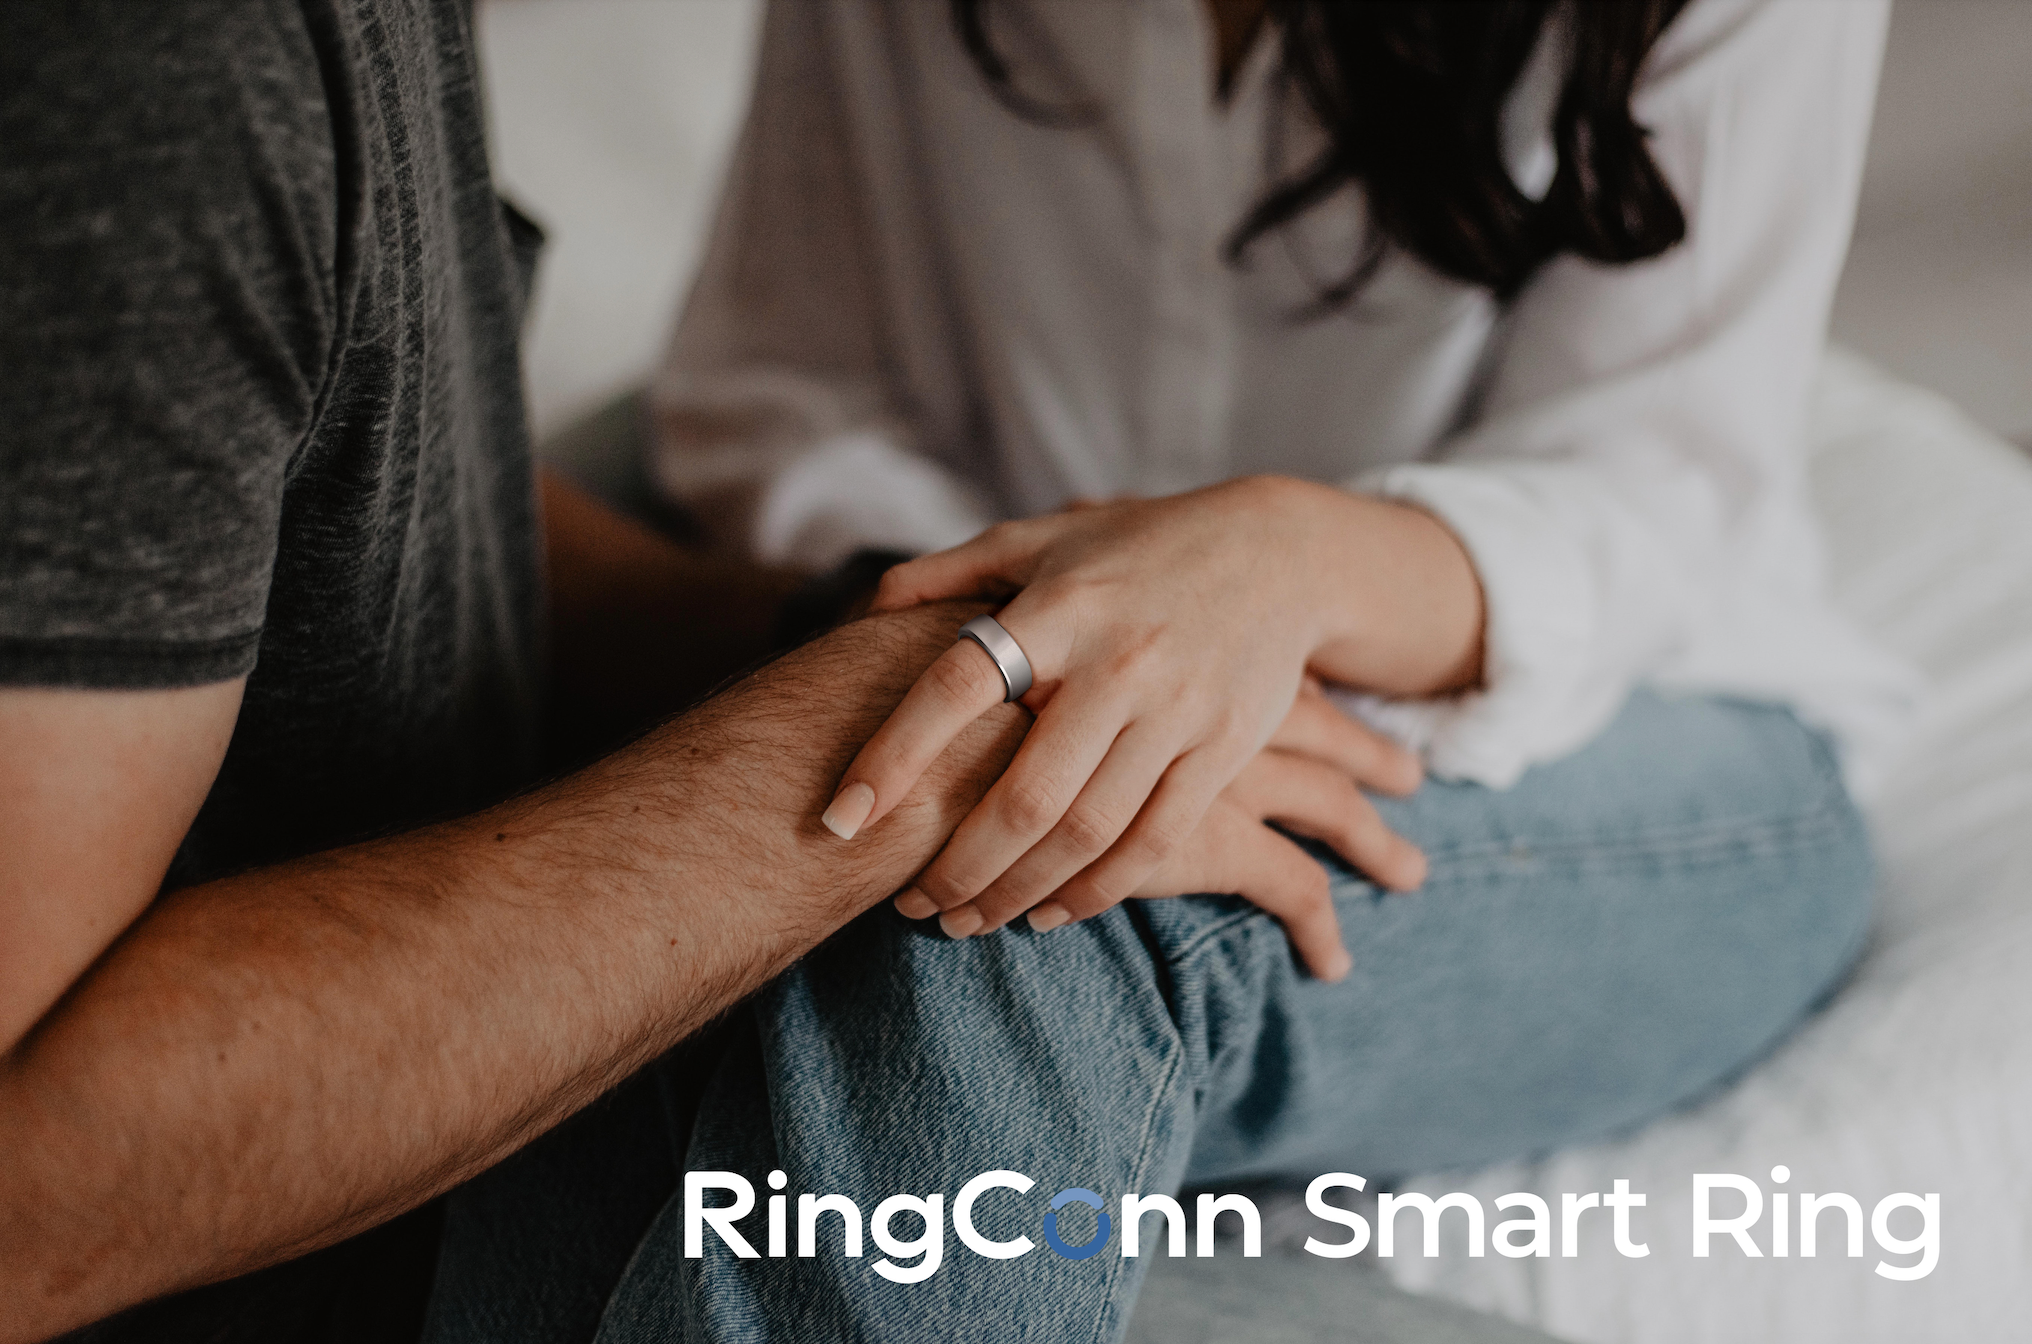 Connect and Care for Your Family with RingConn Sharing Feature